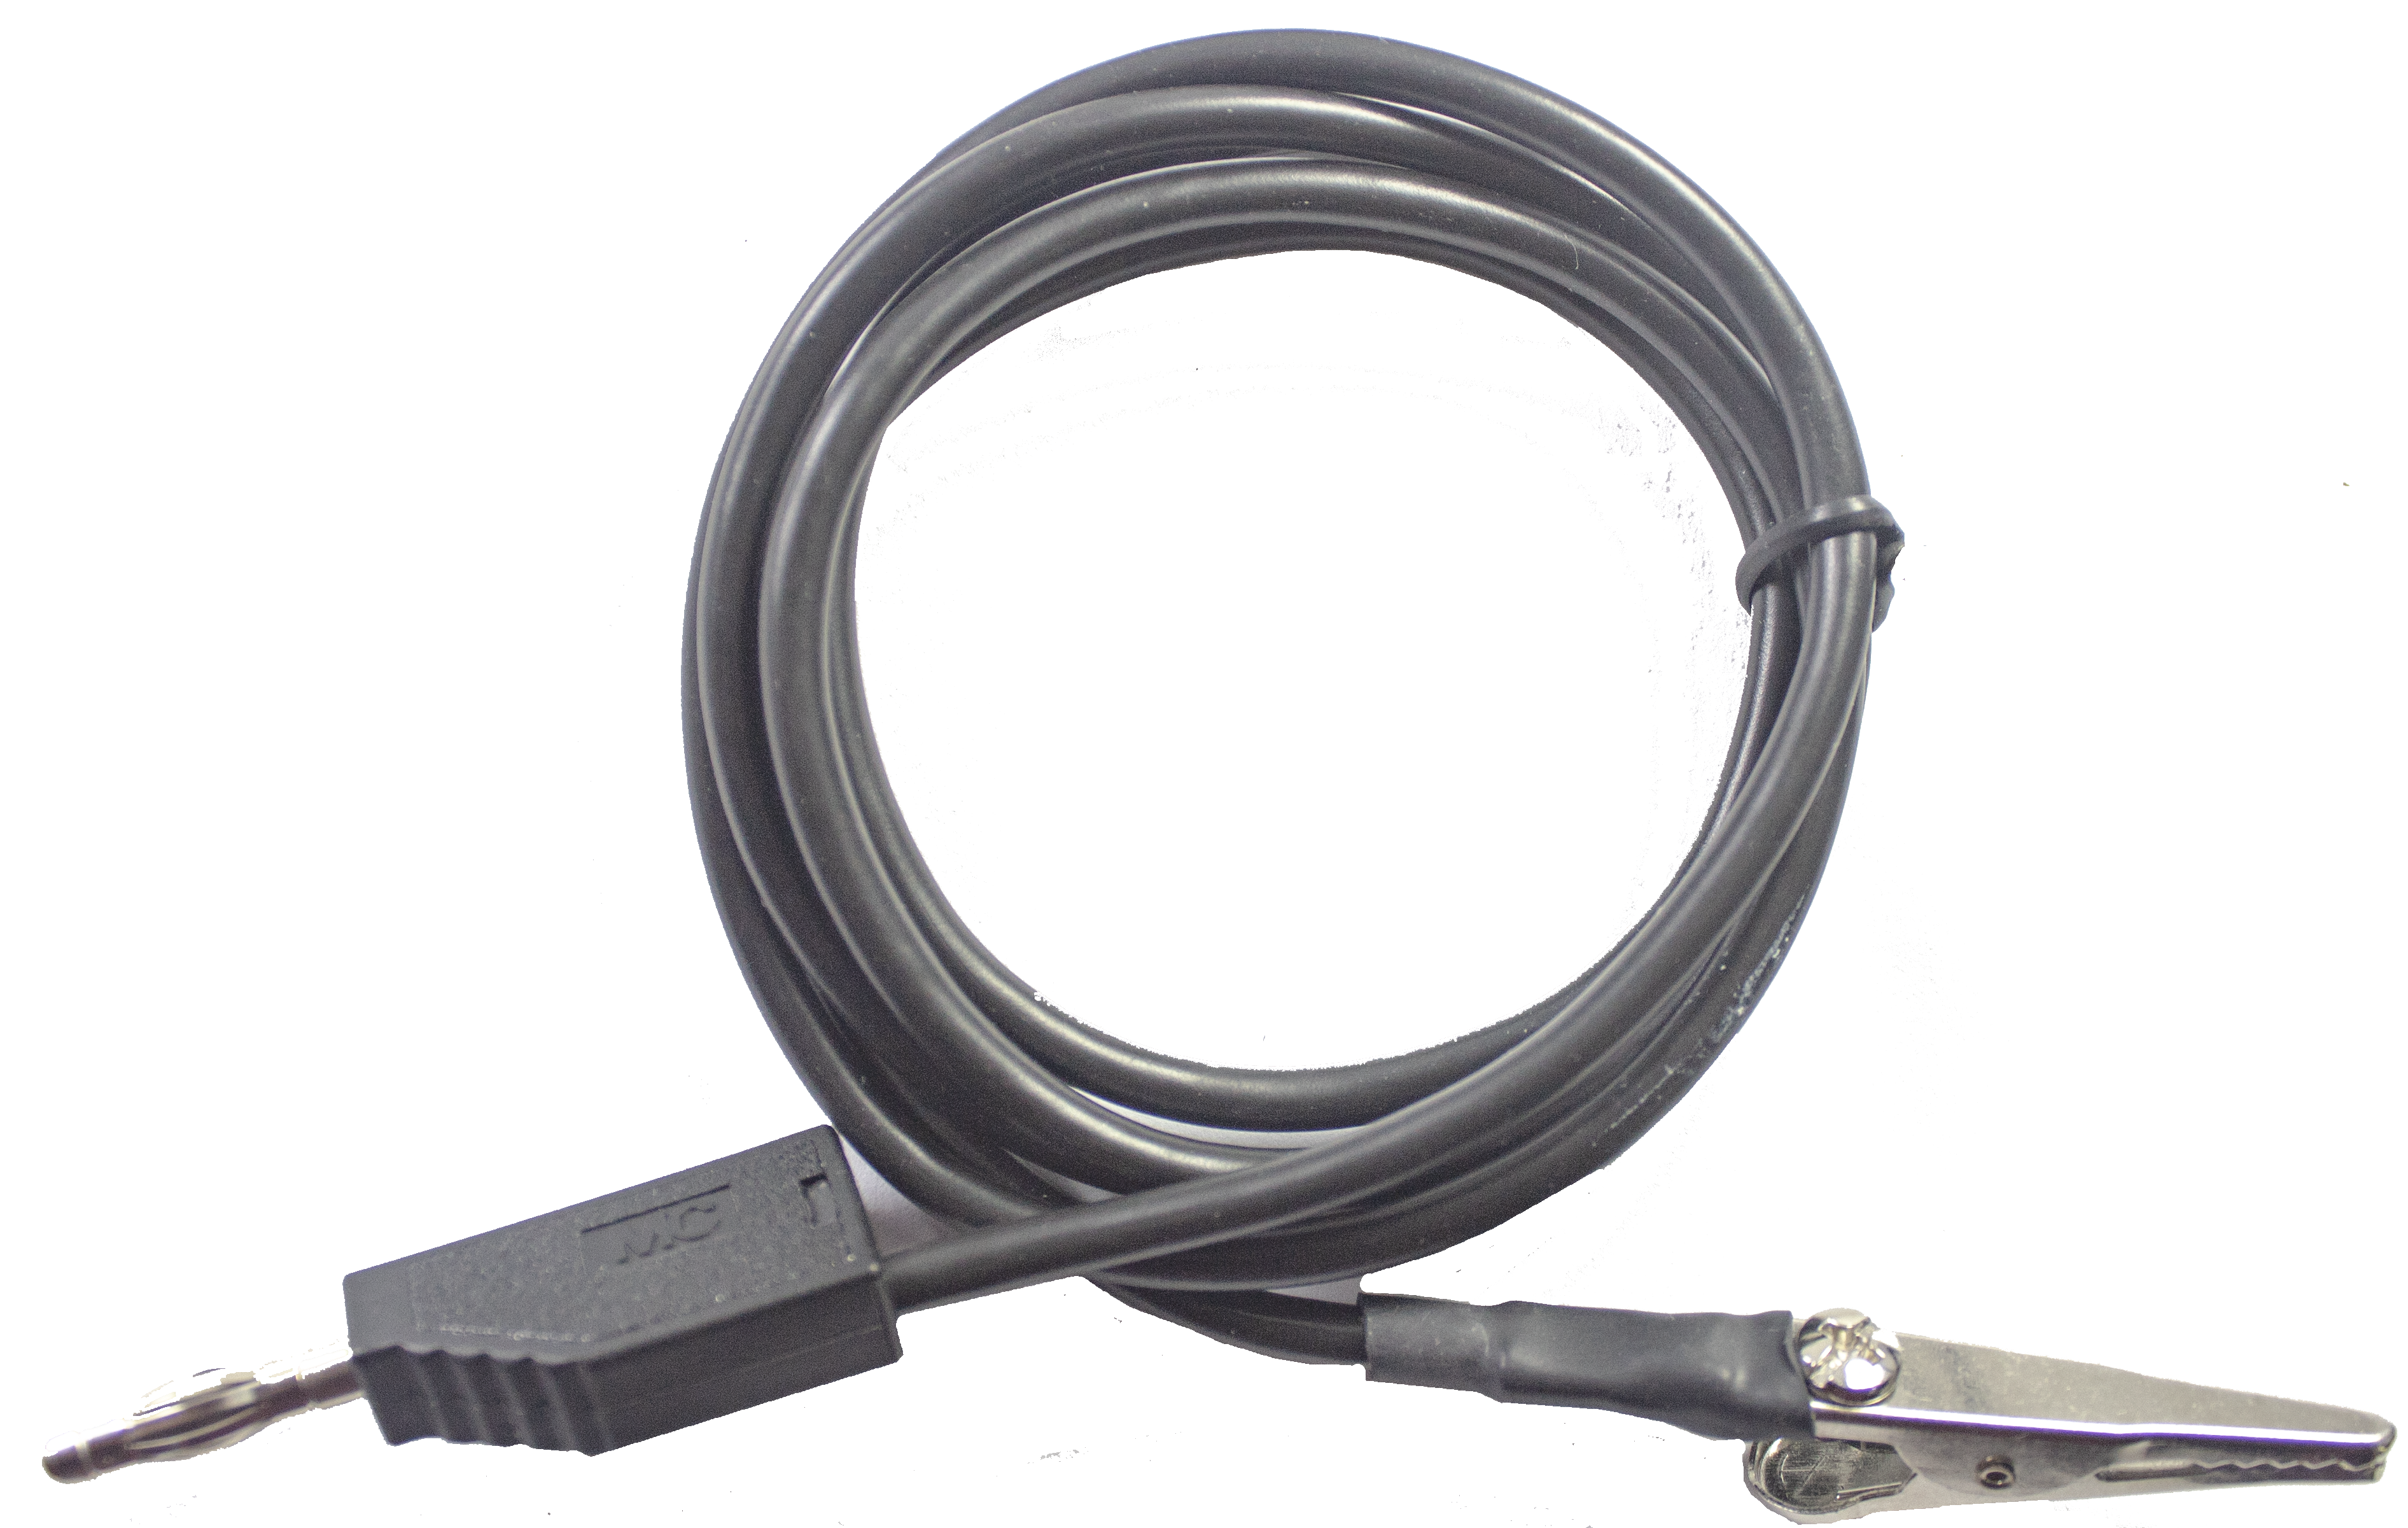 PUK-702: Clip with Cable 100cm: 4mm plug